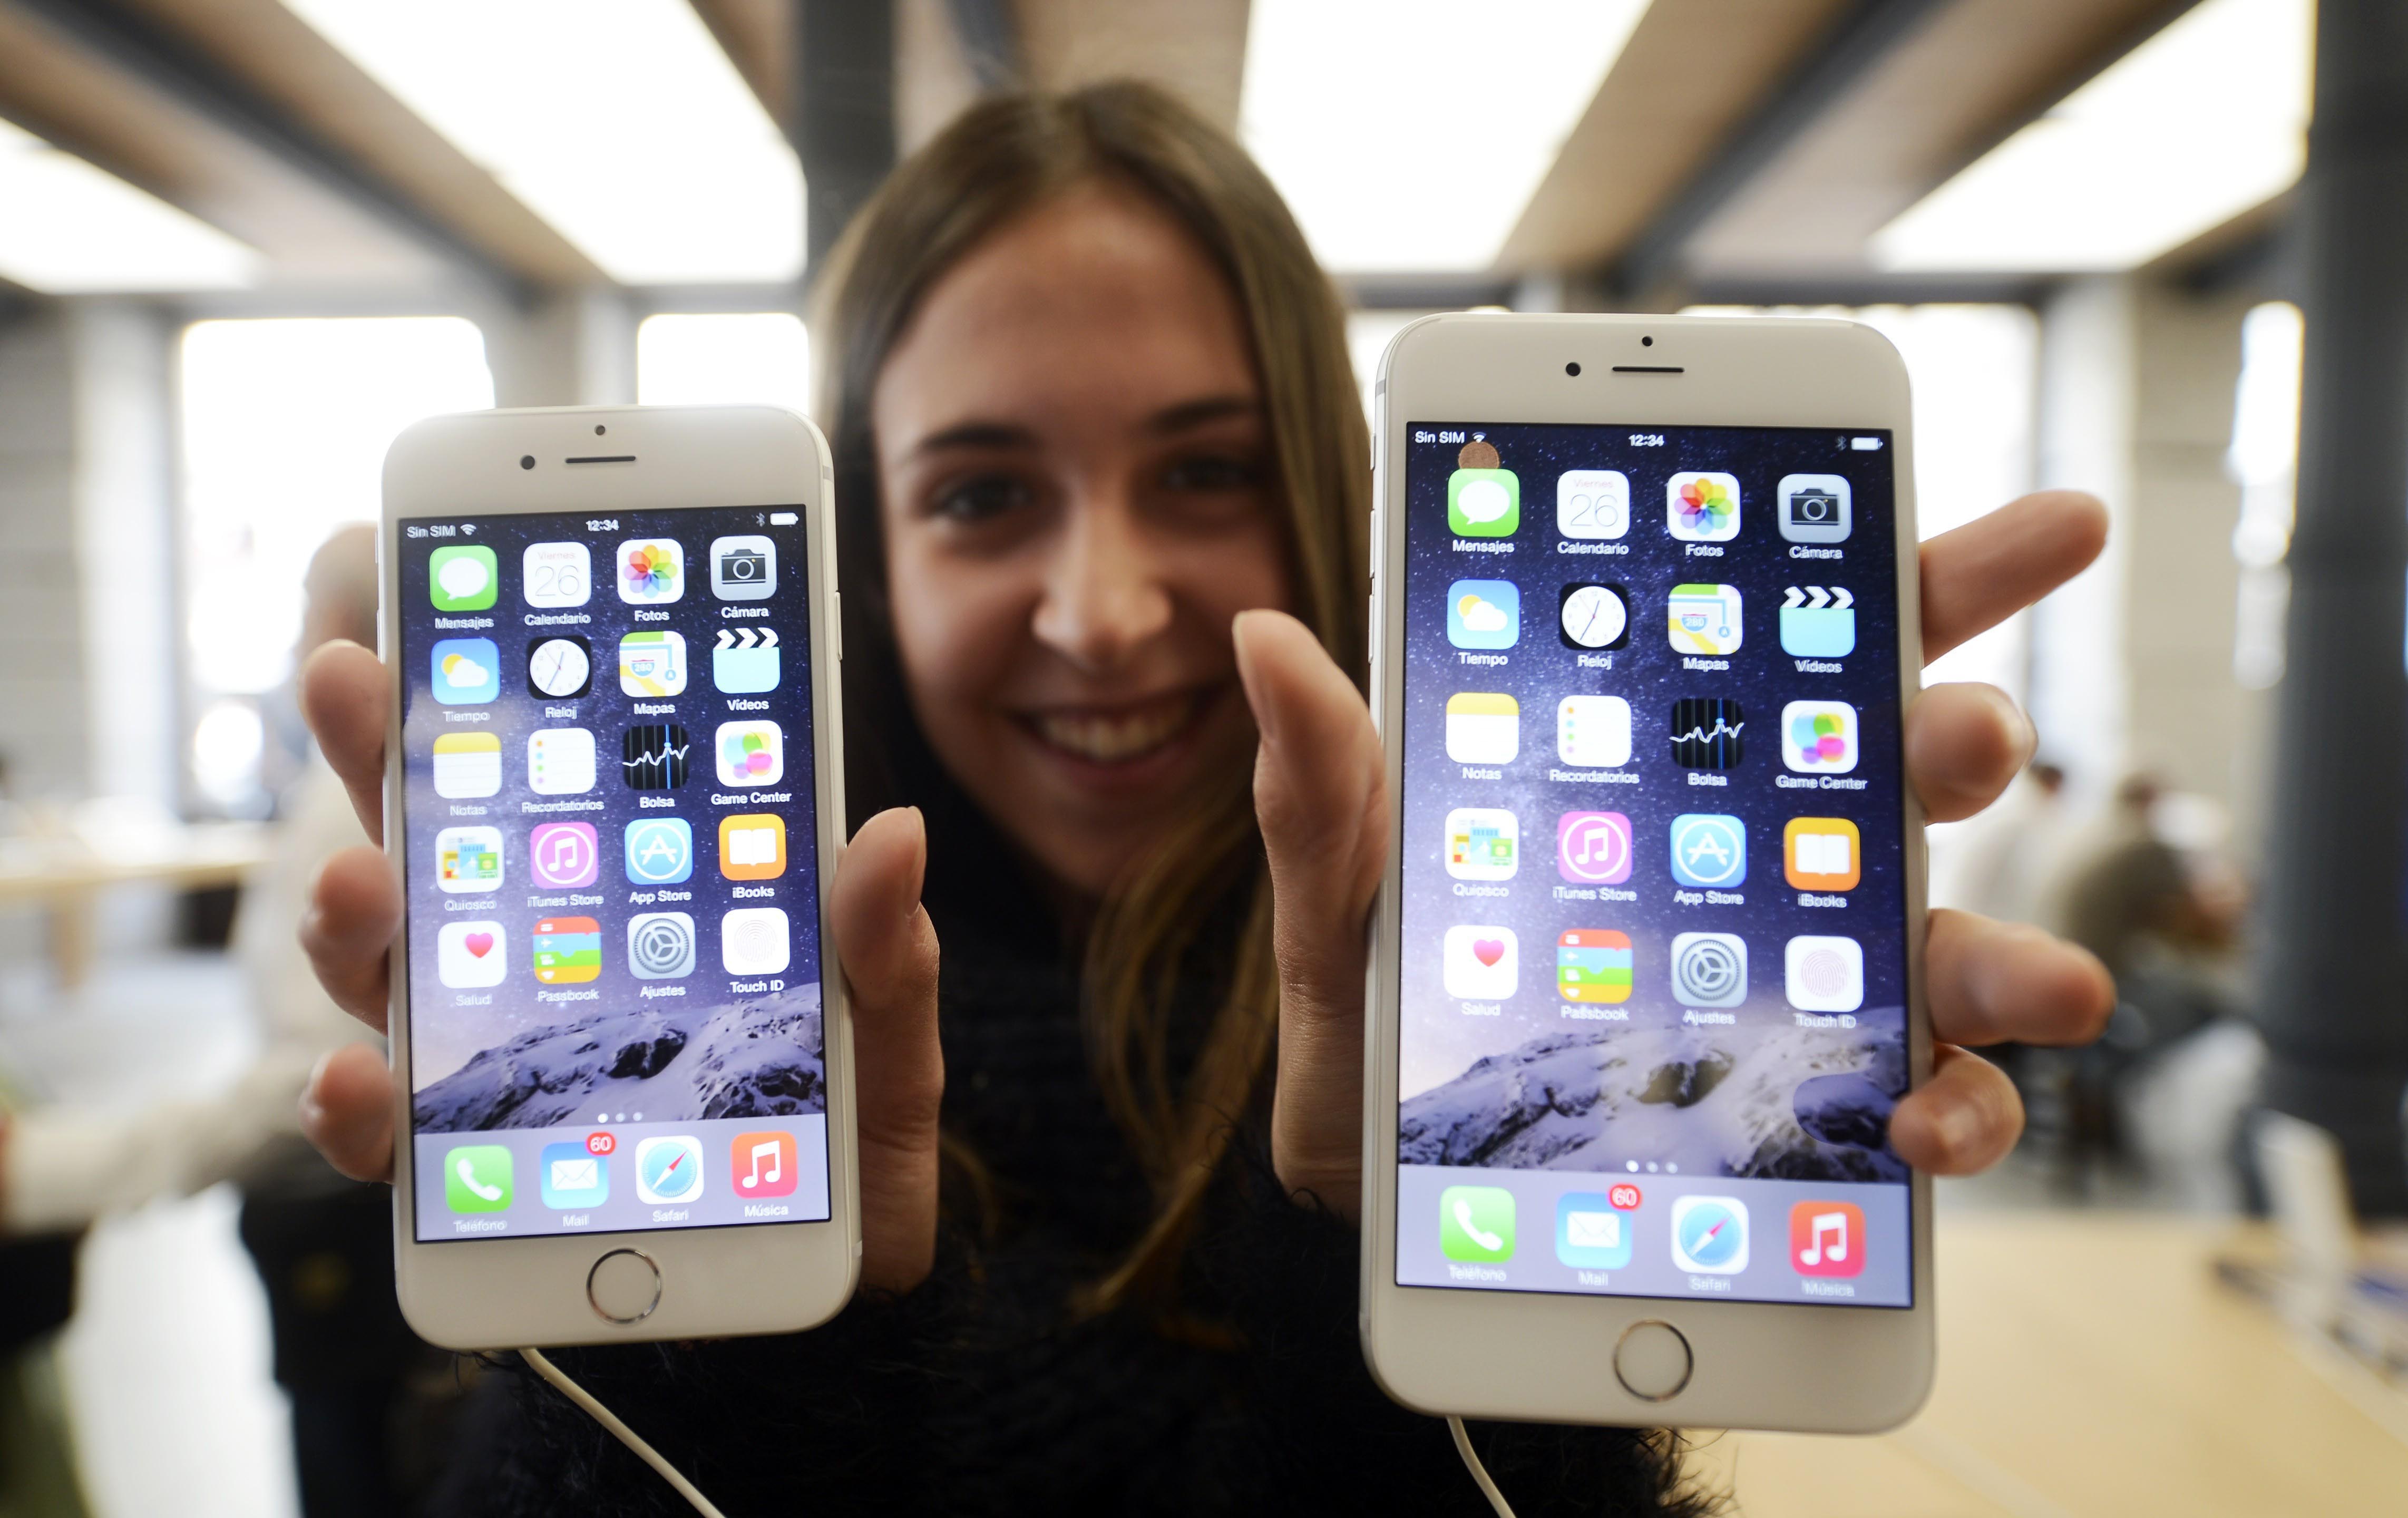 Apple's iPhone 6 and iPhone 6 Plus. (Anadolu Agency&mdash;Getty Images)